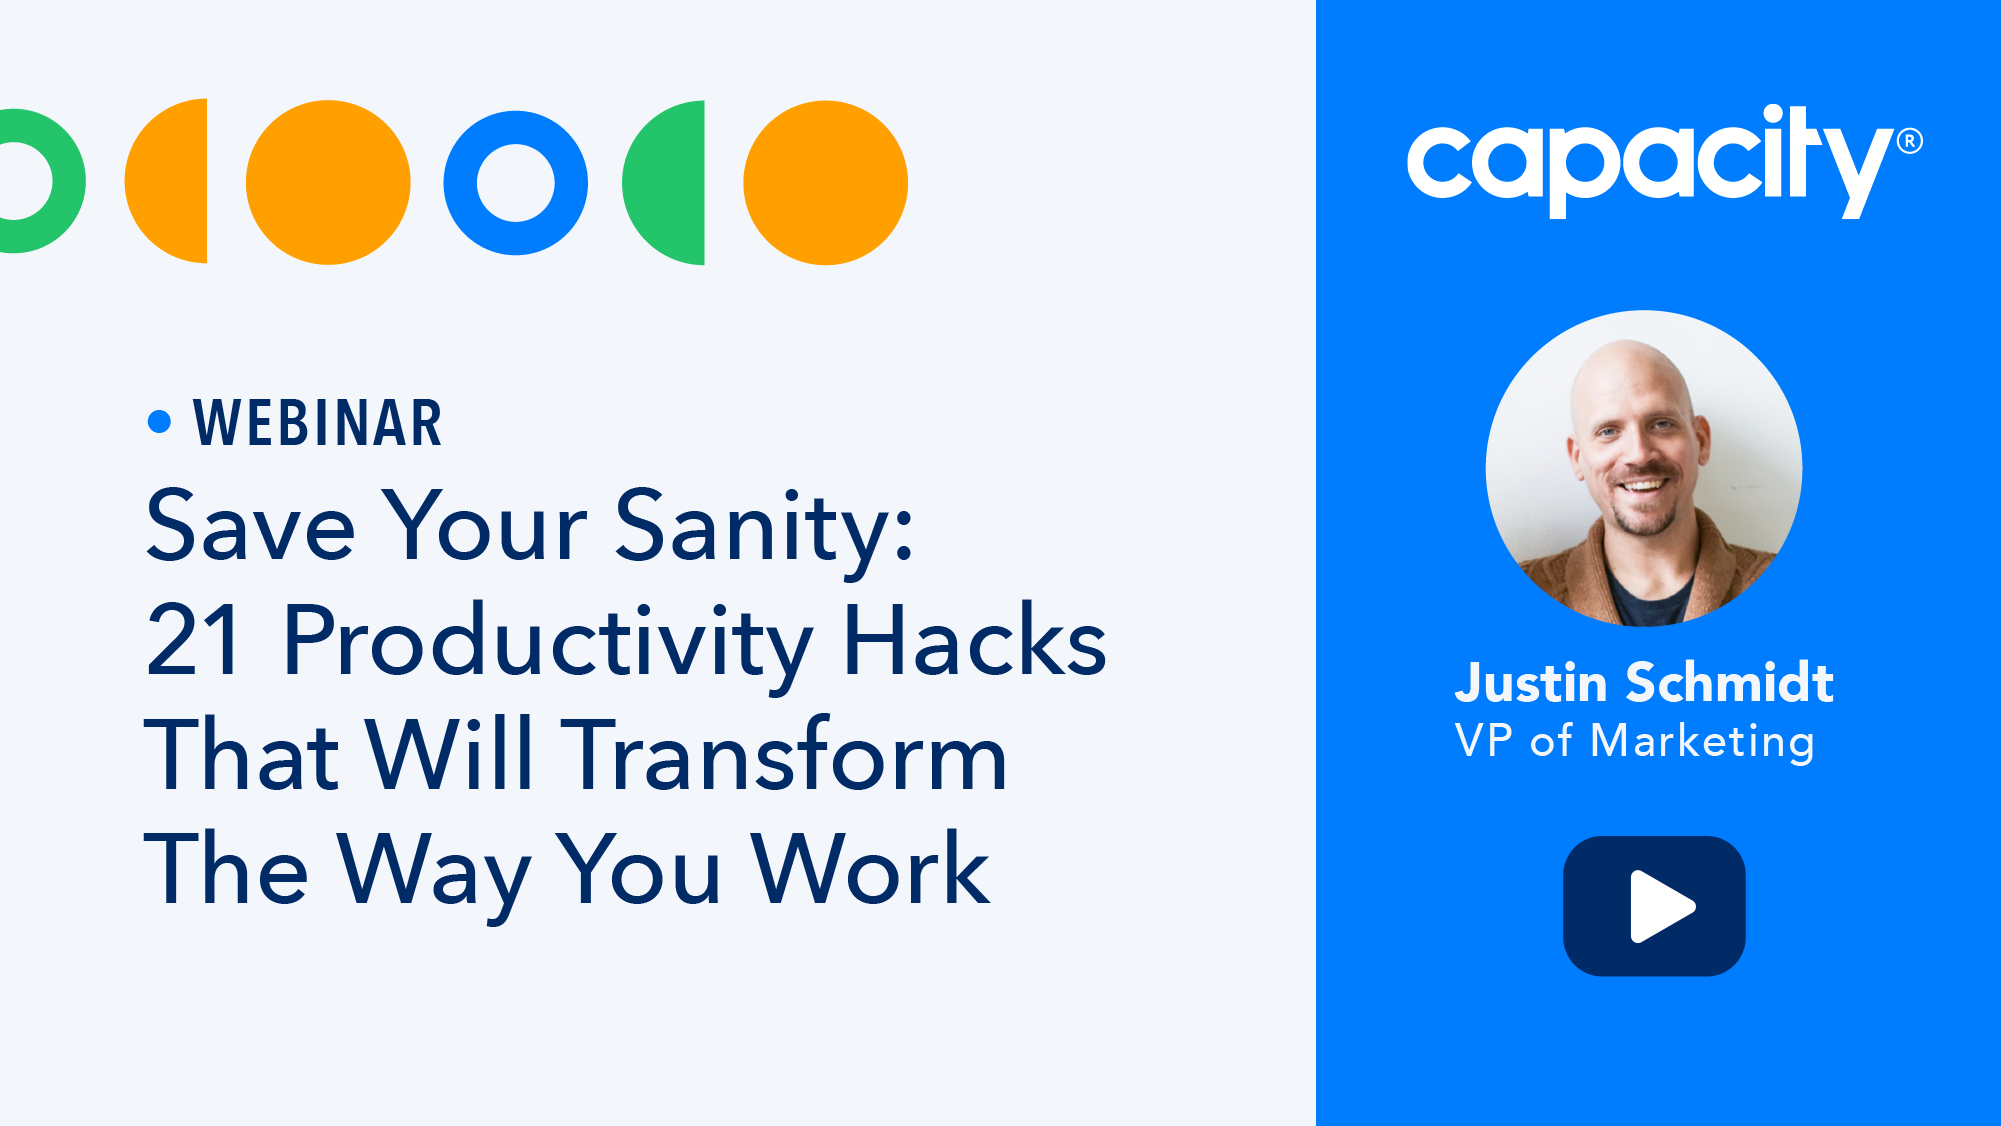 Save Your Sanity: 21 Productivity Hacks That Will Transform The Way You Work